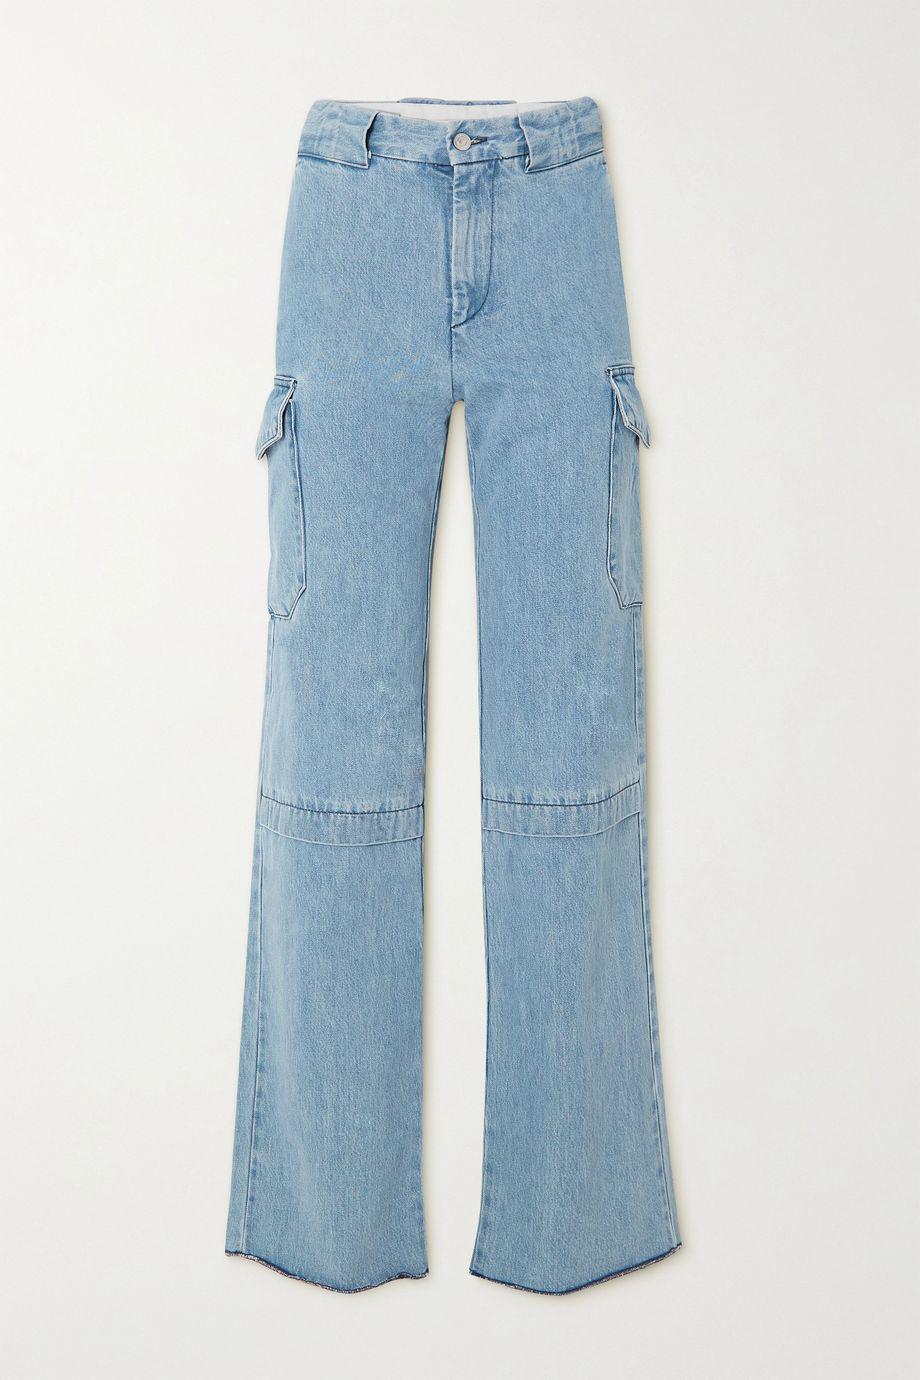 Crash high-rise straight-leg jeans by COMMISSION